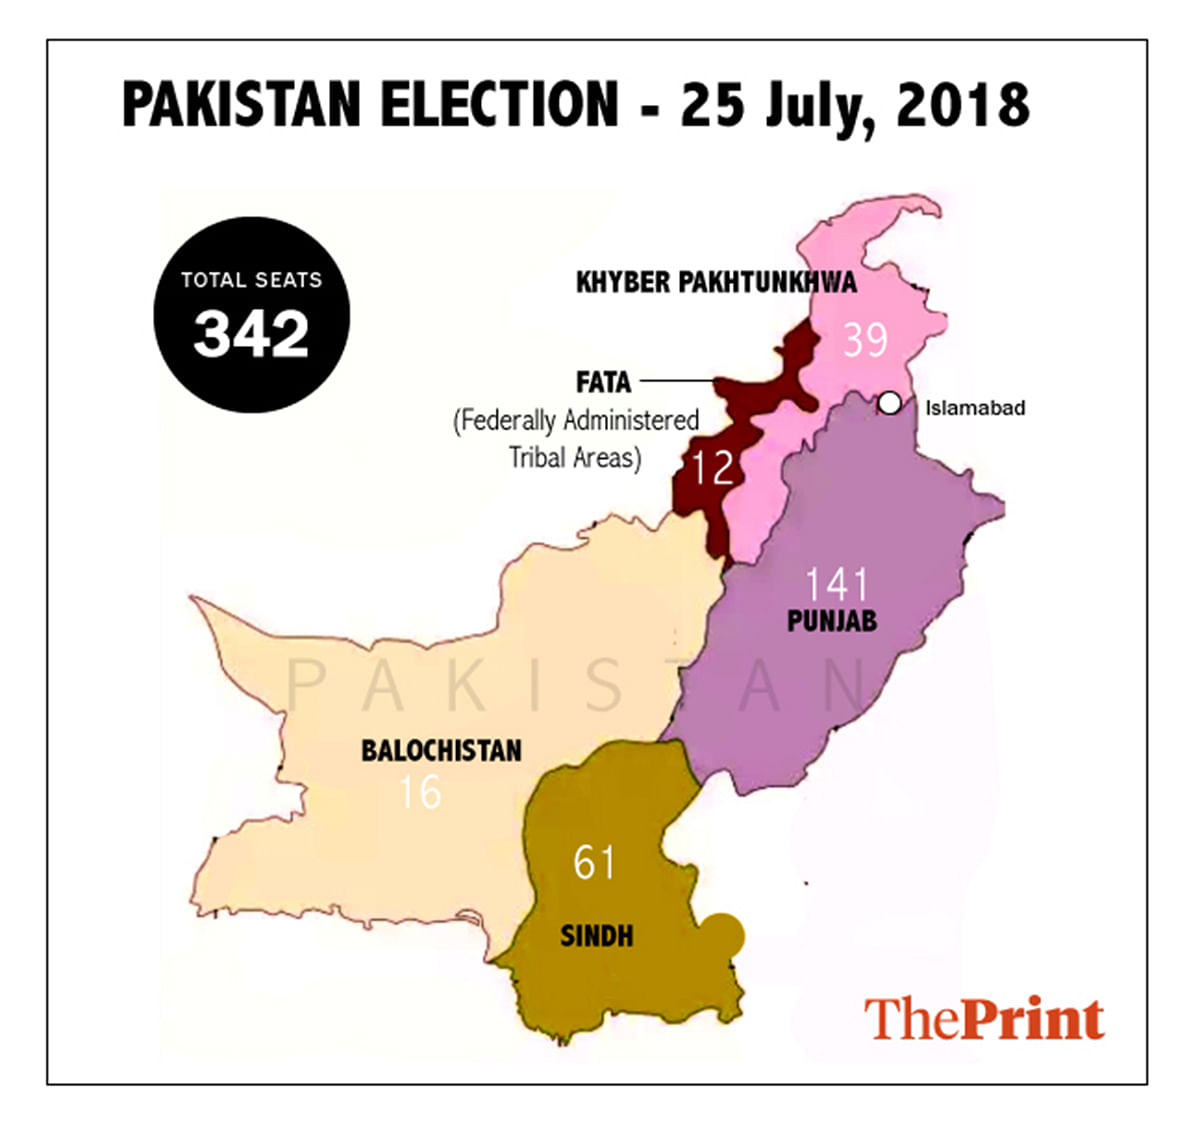 Results of the election will be announced on 26 July, 2018 | Infographic: Arindam Mukherjee